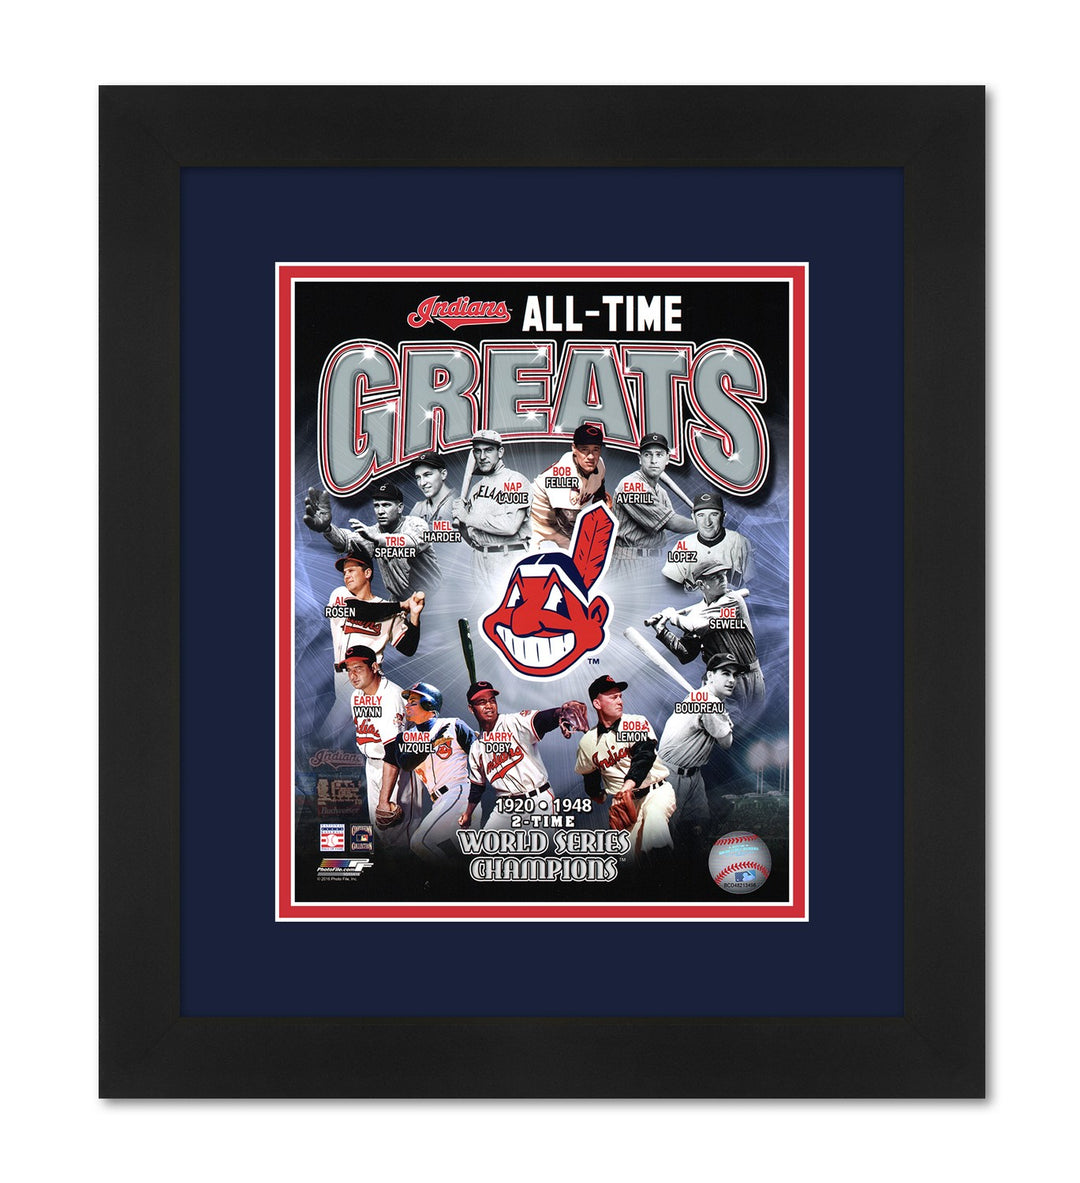 Cleveland Indians All-Time Greats Team Photo Collage in a 13x16 Professionally Framed and Matted with Matching Team Colors